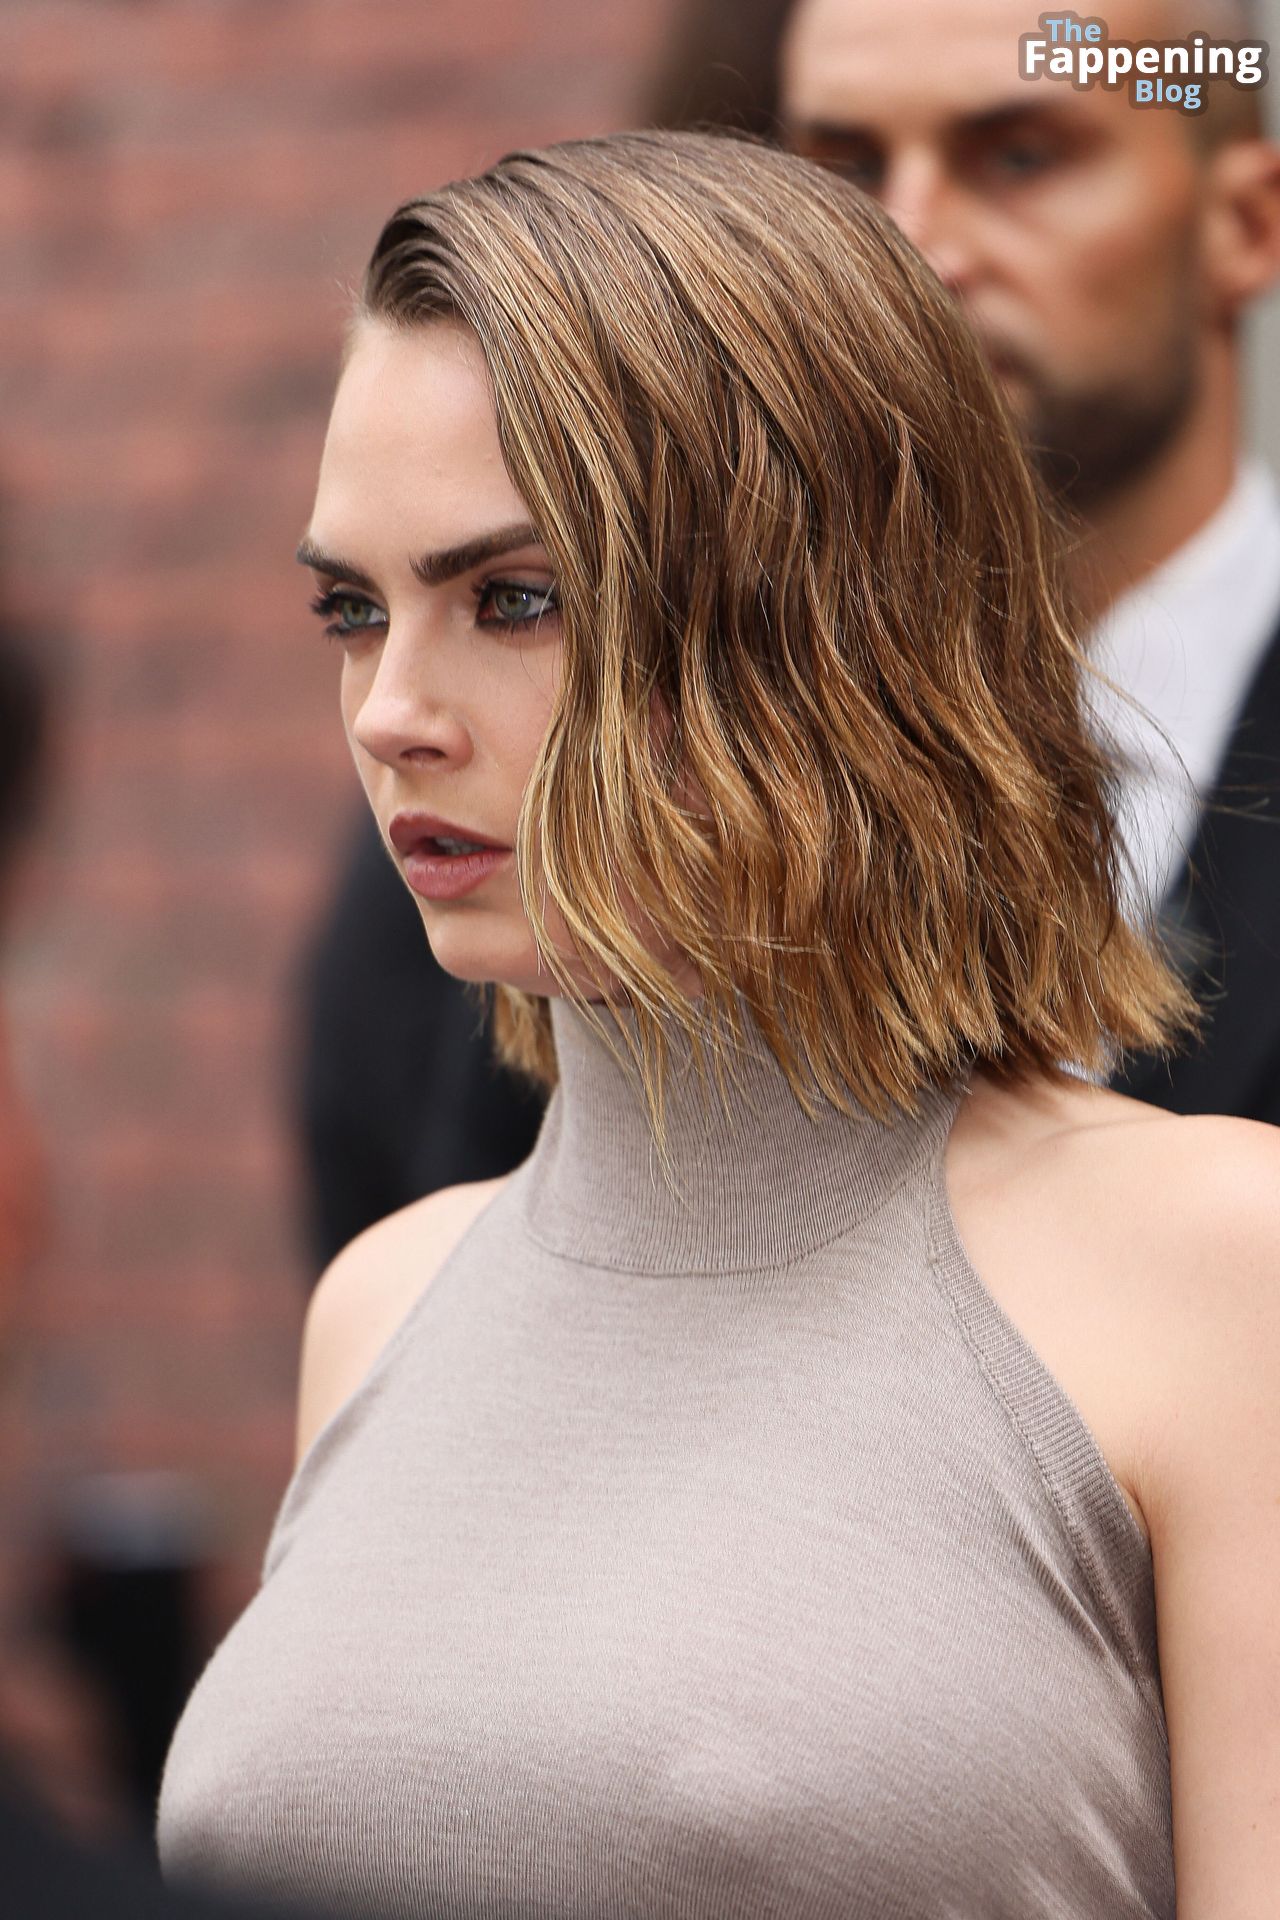 Cara-Delevingne-Sexy-6-The-Fappening-Blog.jpg